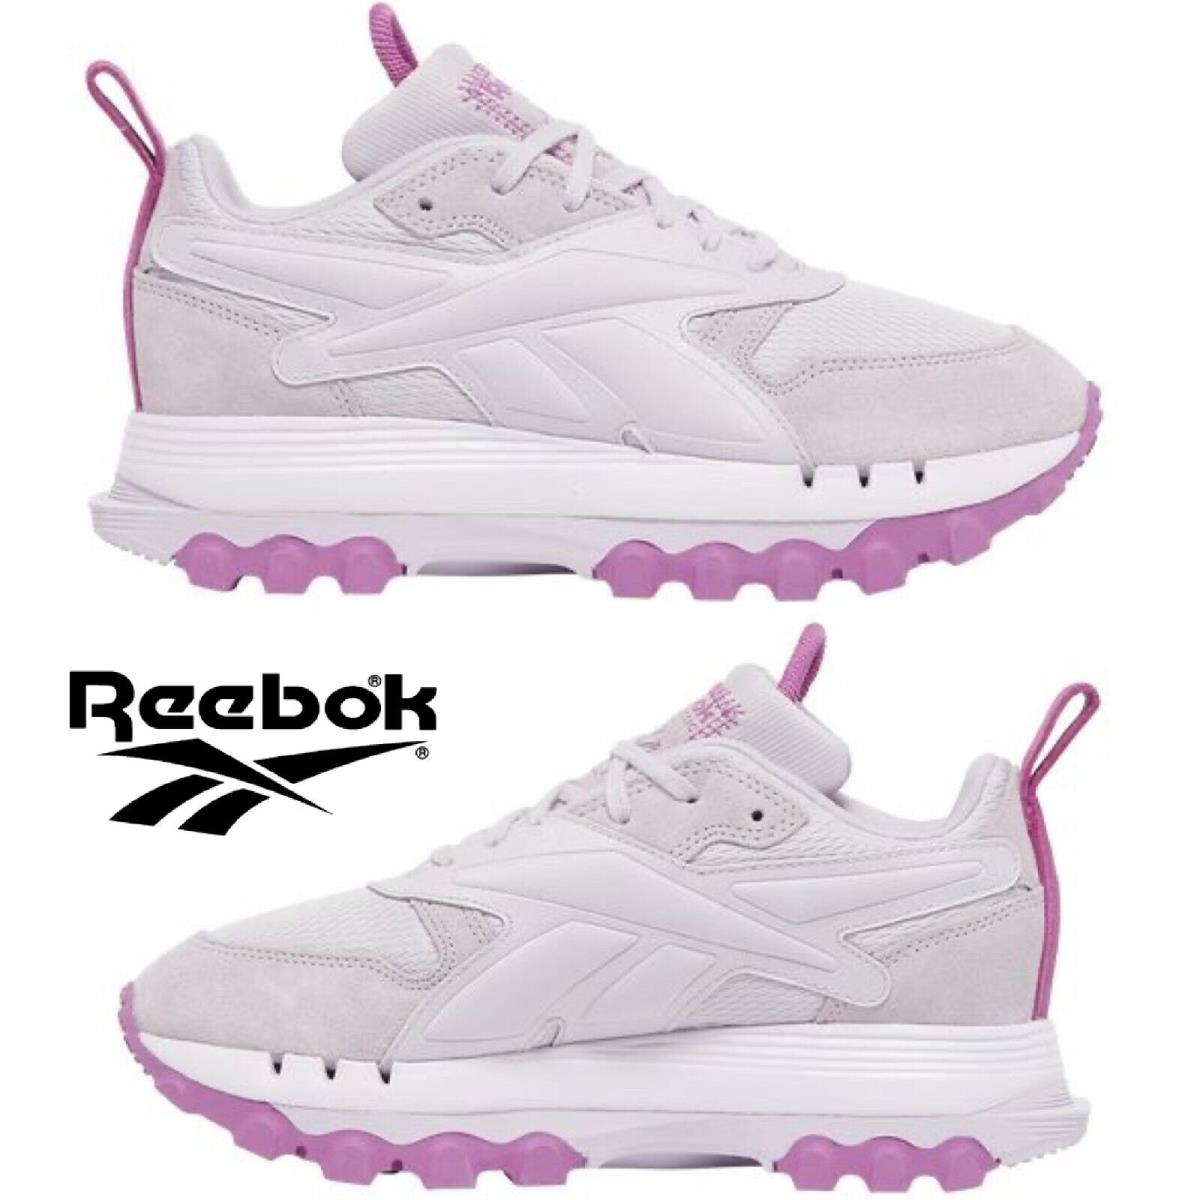 Reebok Classic Leather Cardi V2 Women`s Casual Shoes Sport Sneakers Pink - Pink , Pink Manufacturer